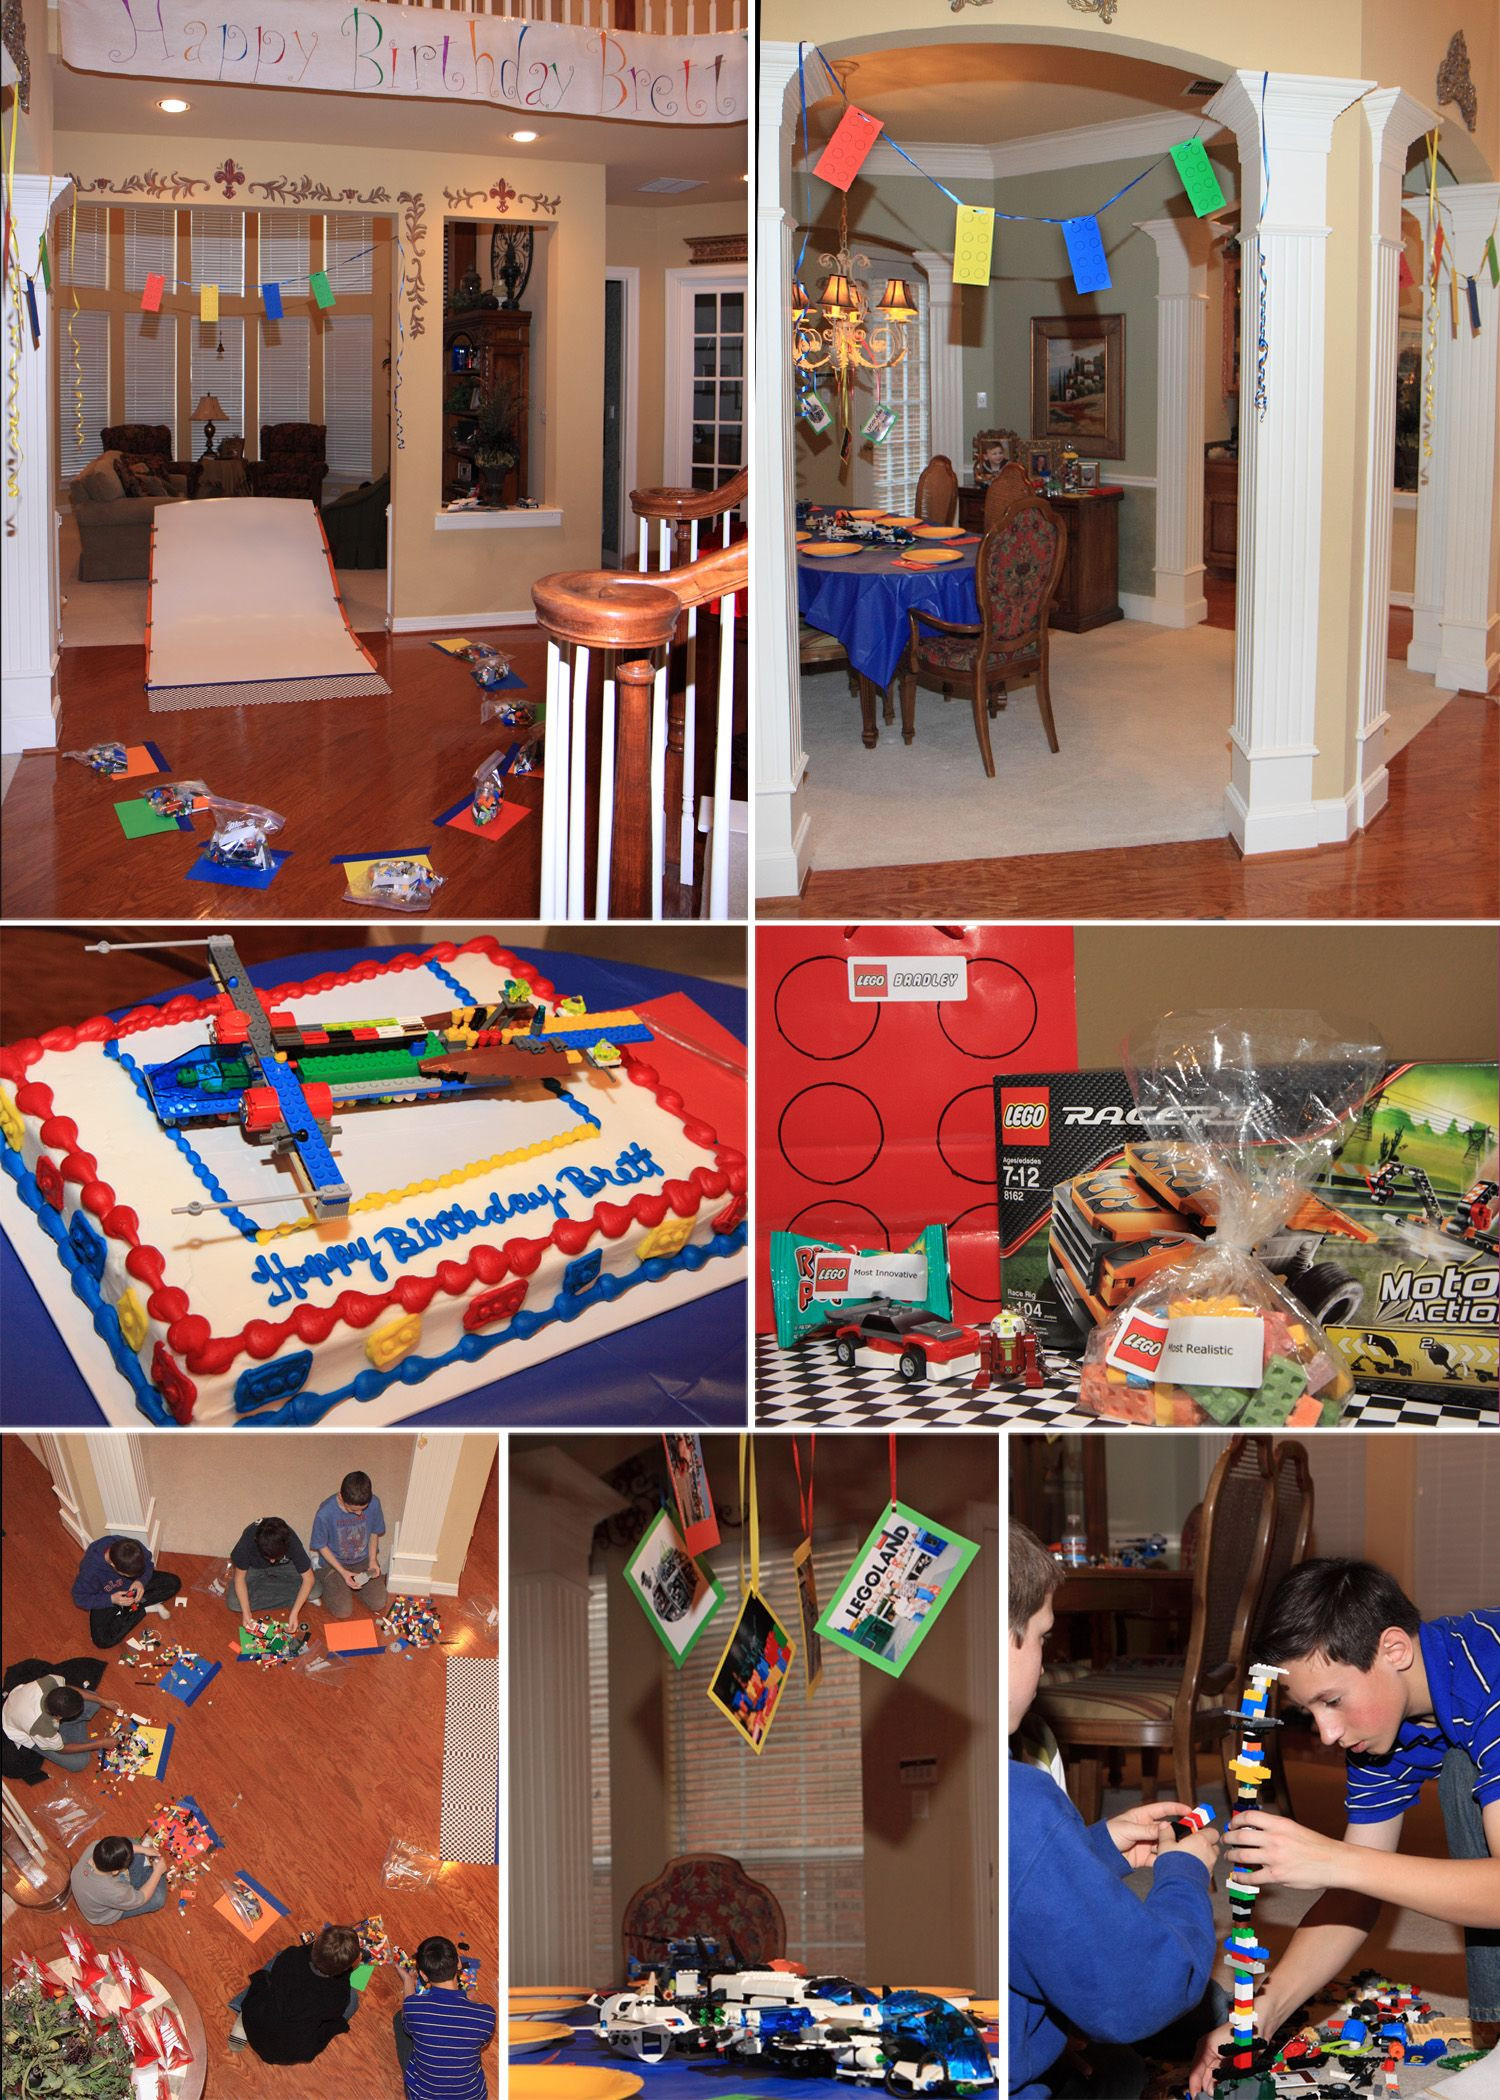 Boys 11Th Birthday Party Ideas
 An 11 Year Old Boy s Lego Birthday Party Submit an Entry